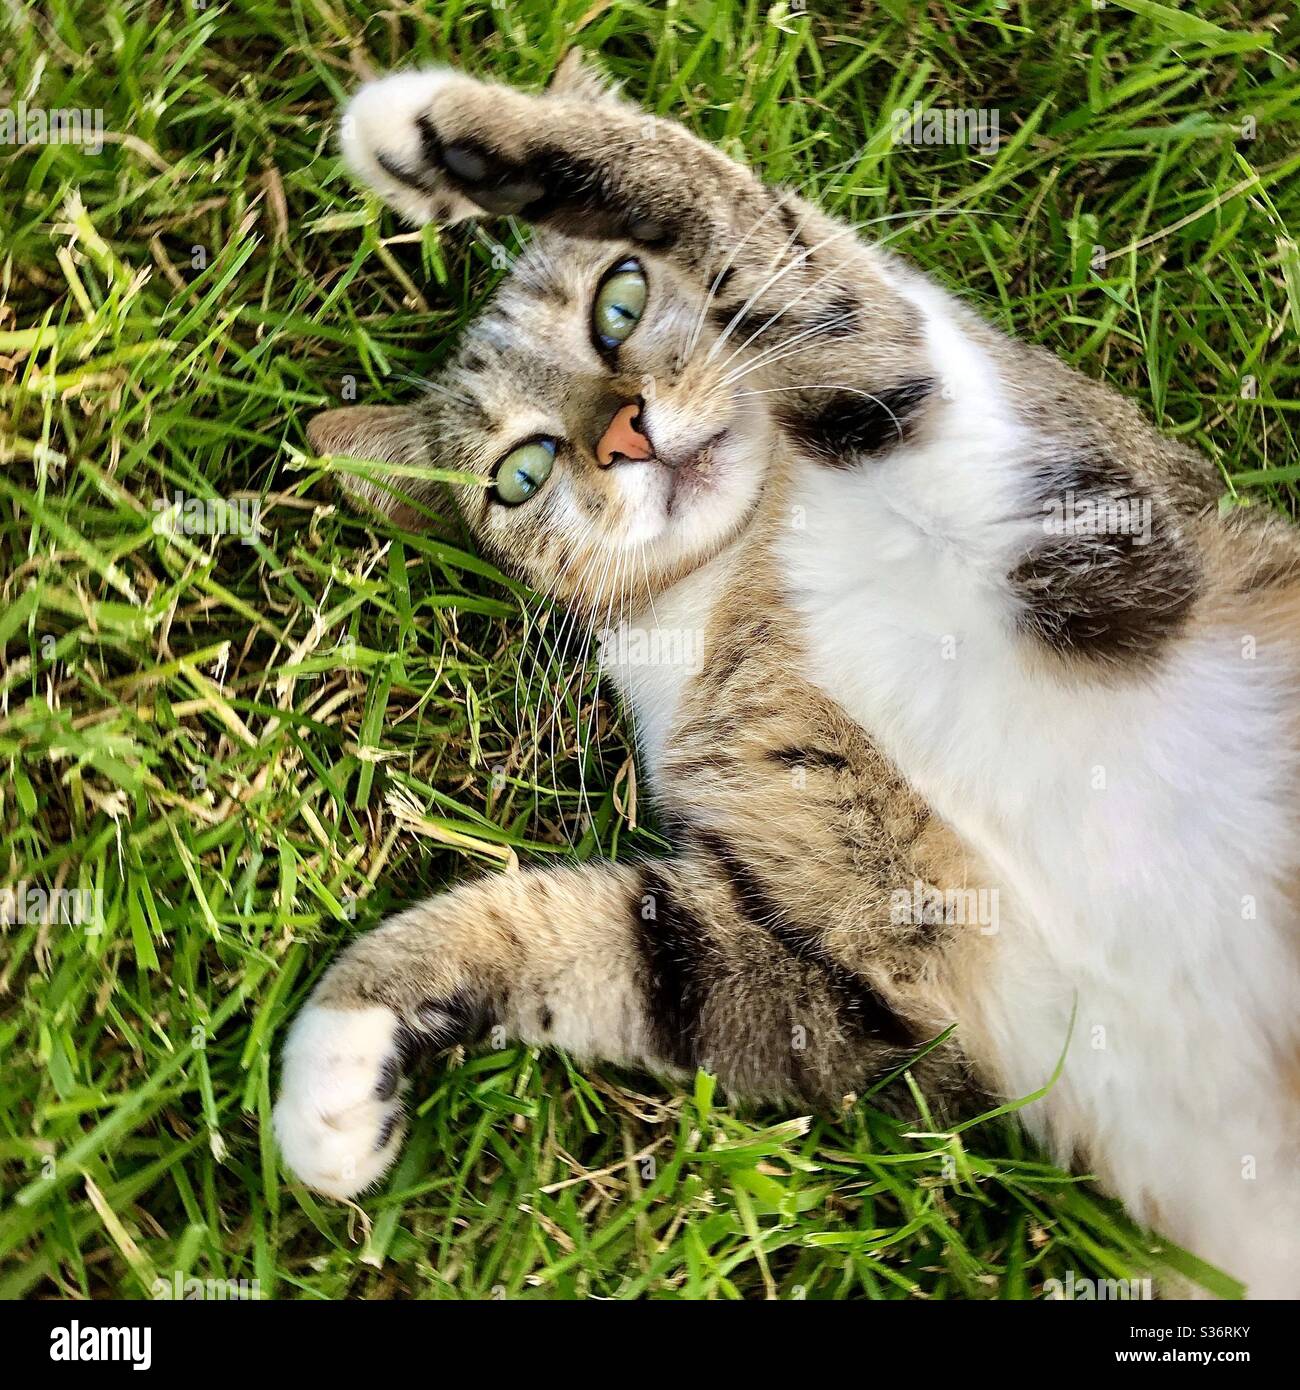 Surprised tabby cat with big eyes lying on back in grass. Stock Photo